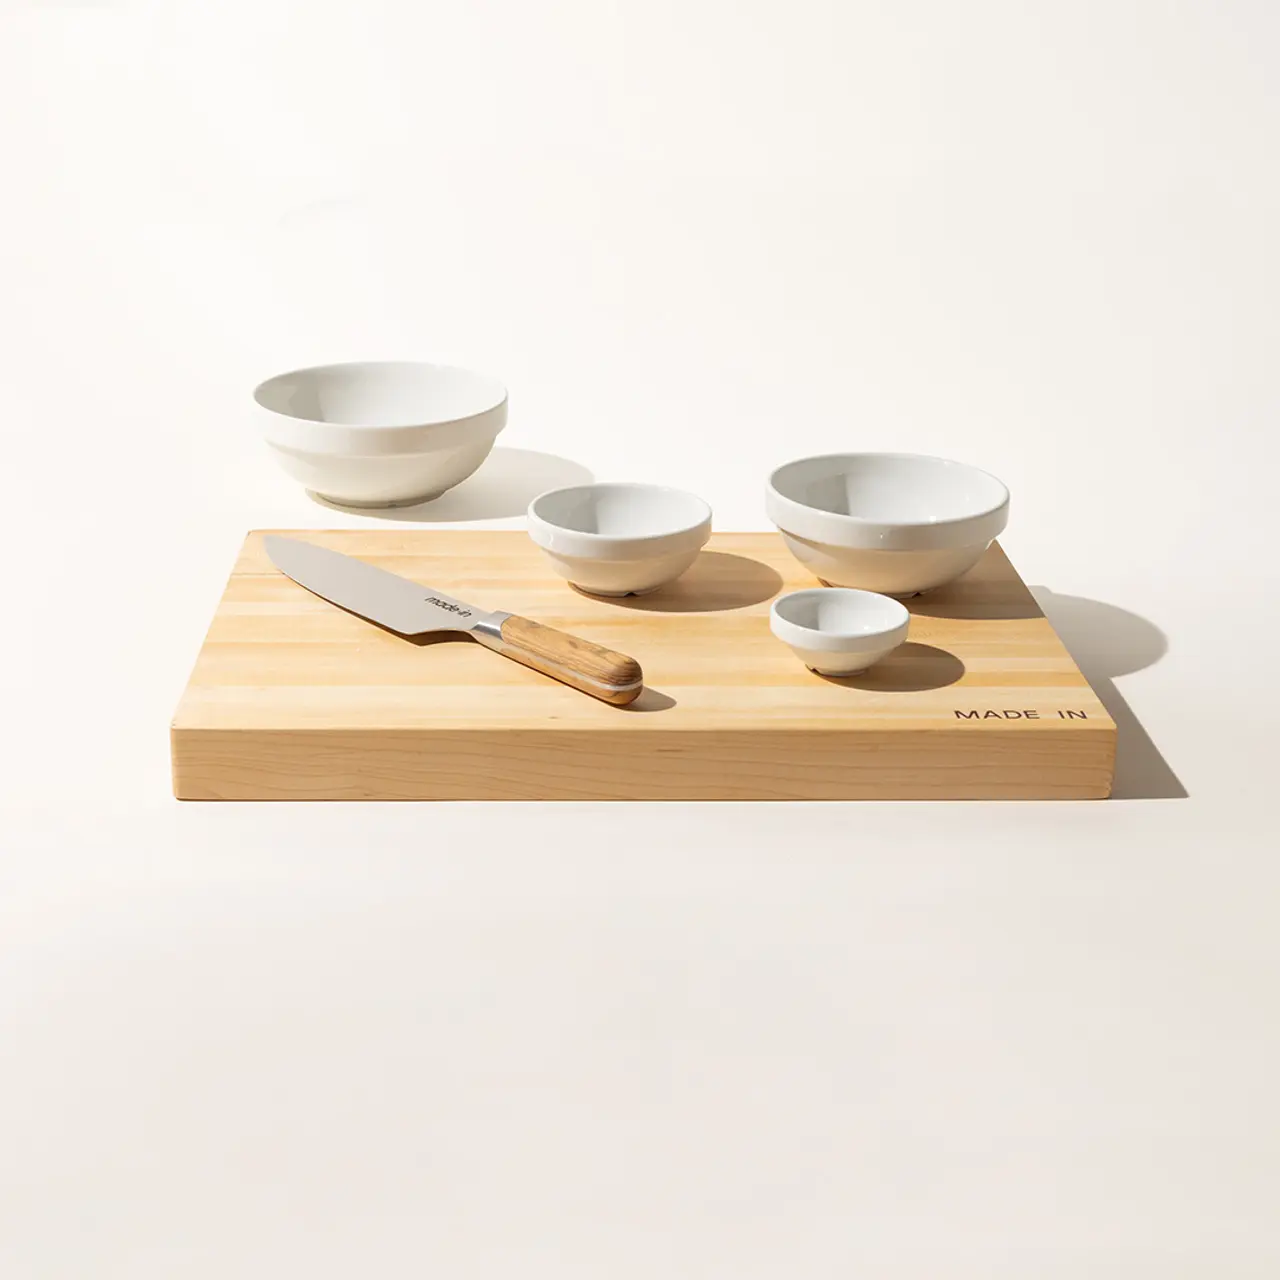 A neatly arranged set of ceramic bowls and a wooden spoon on a bamboo cutting board with a kitchen knife, all on a light background.